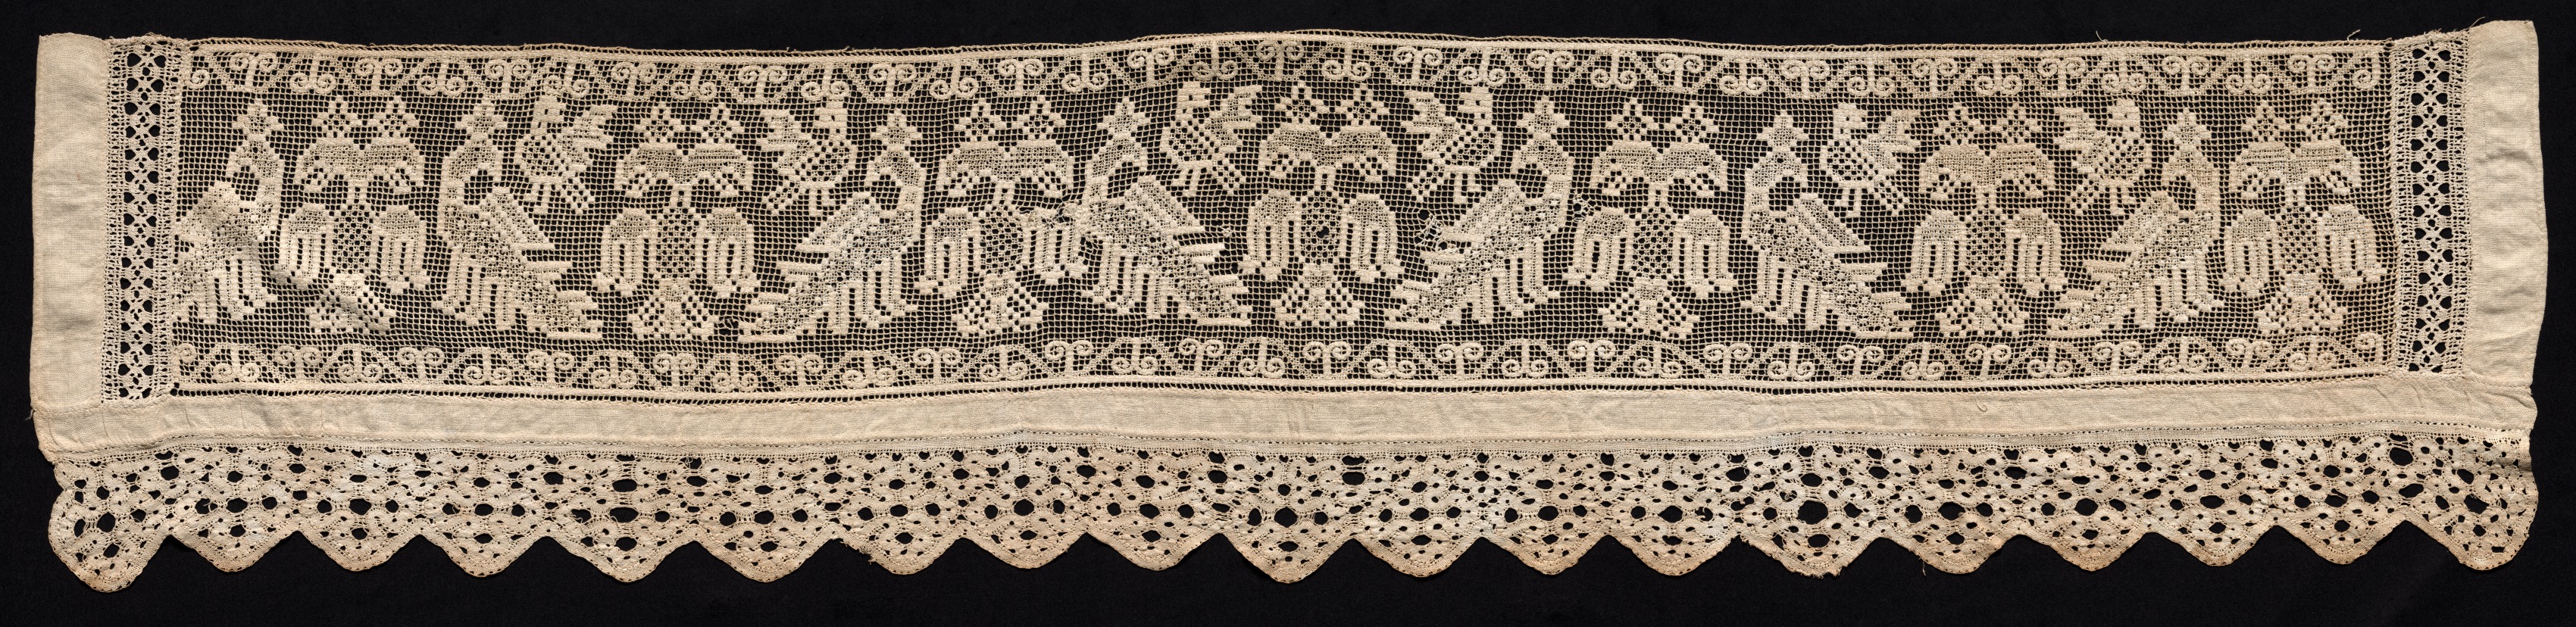 Border with Crowned and Double-Headed Birds